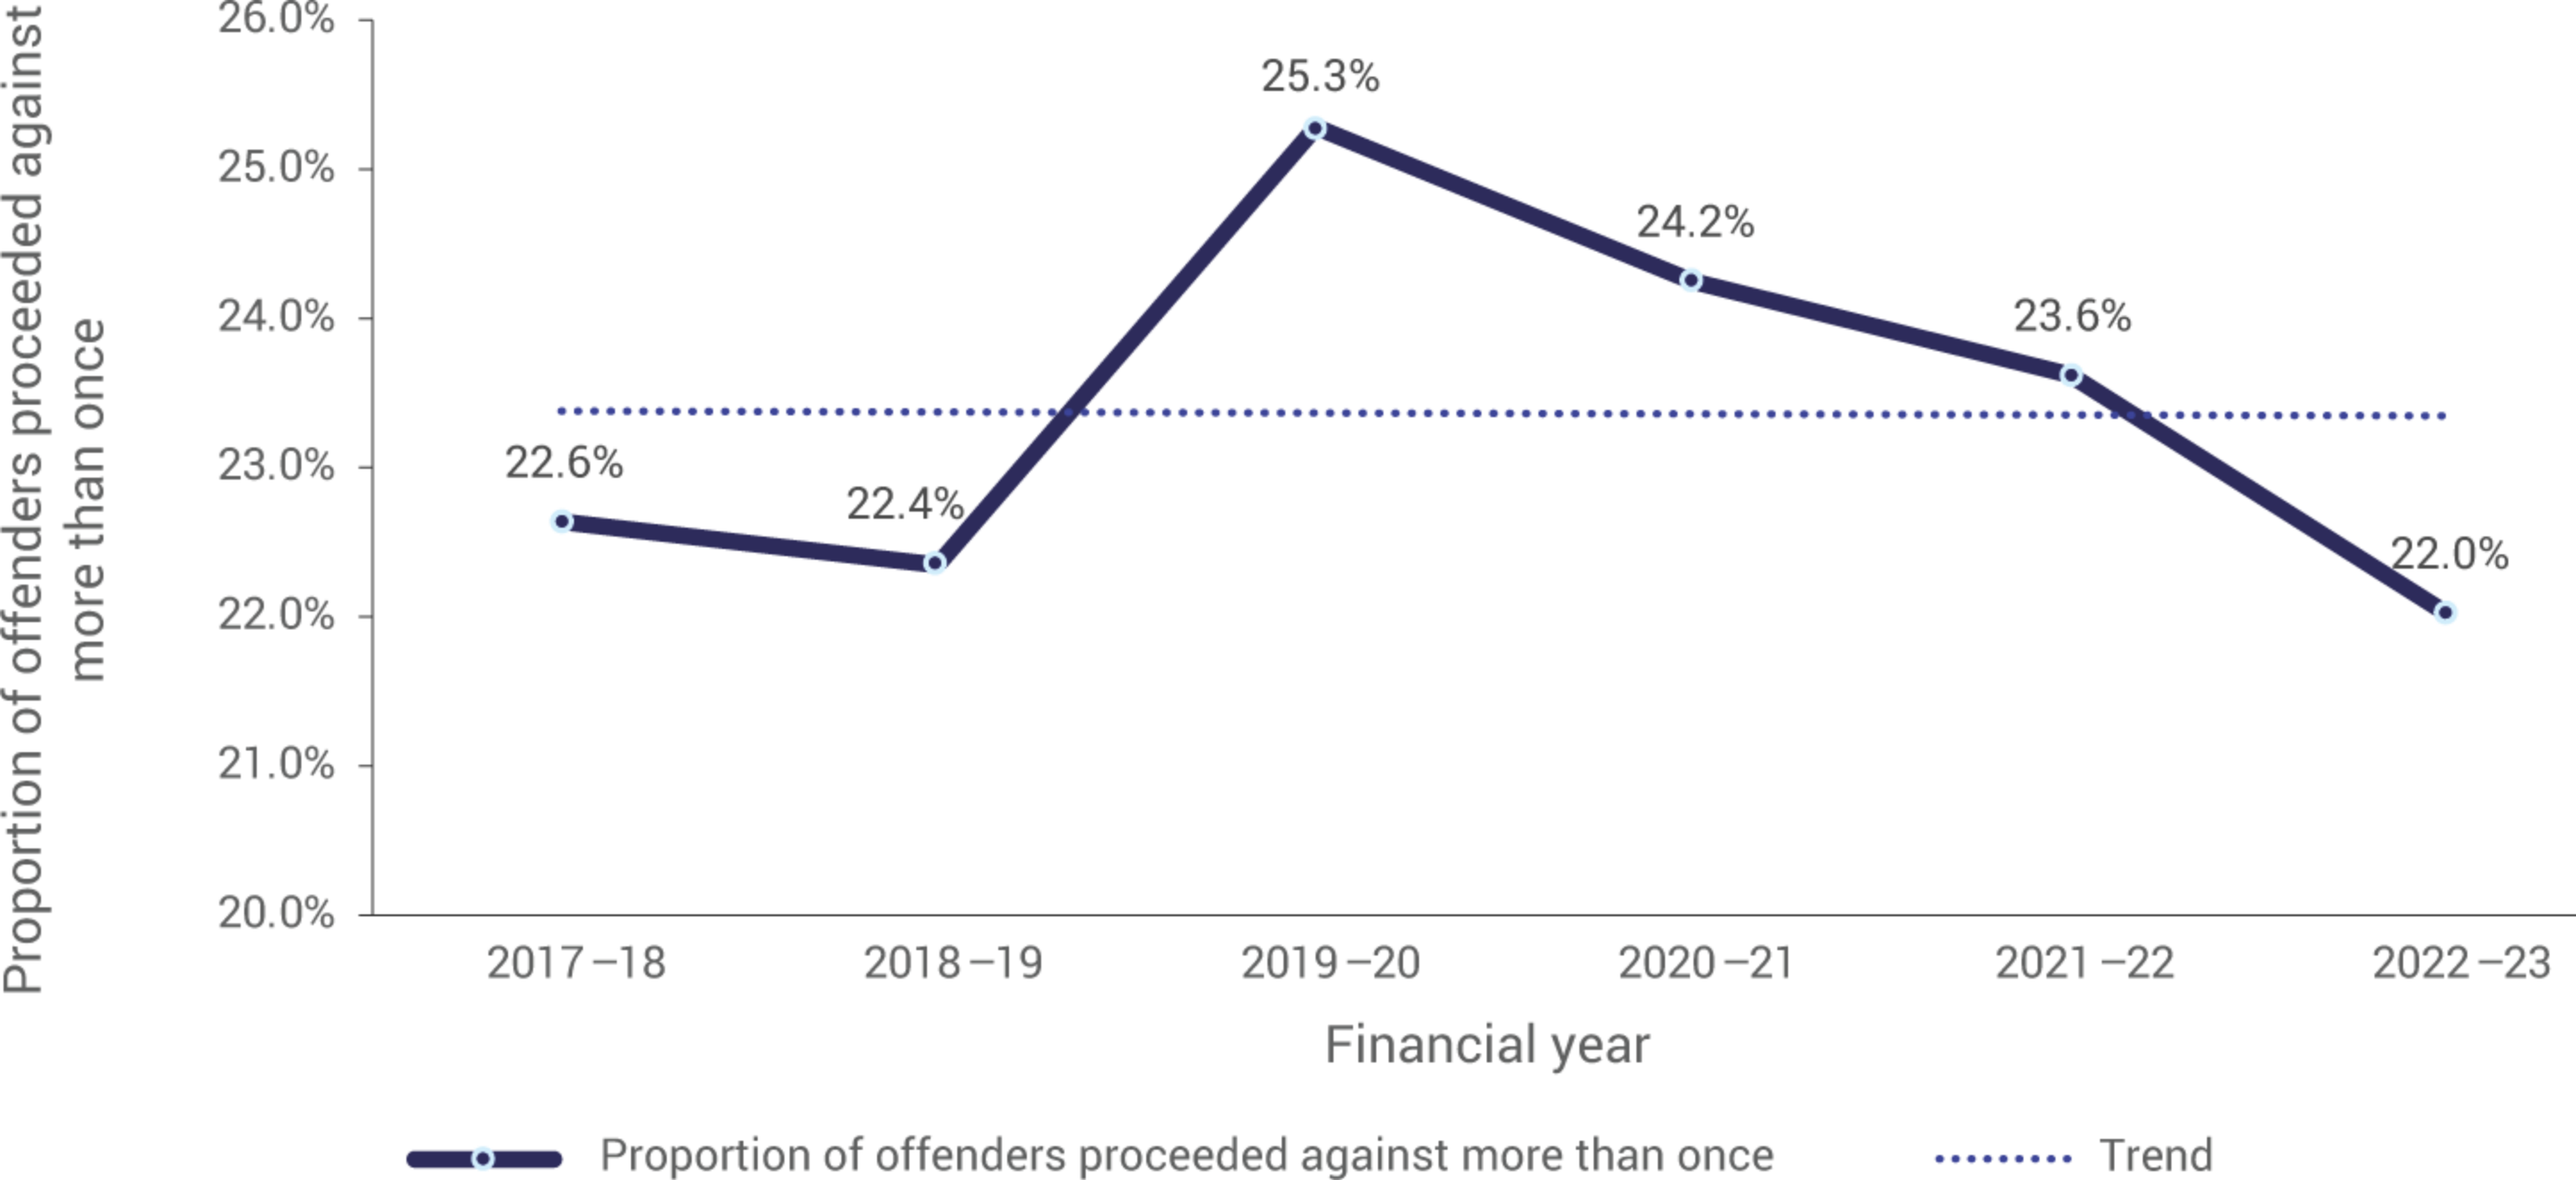 This Figure is a line graph depicting the proportion of offenders proceeded against by police more than once within the previous 12 months over a six-year period, from the 2017-18 financial year to the 2022-23 financial year.